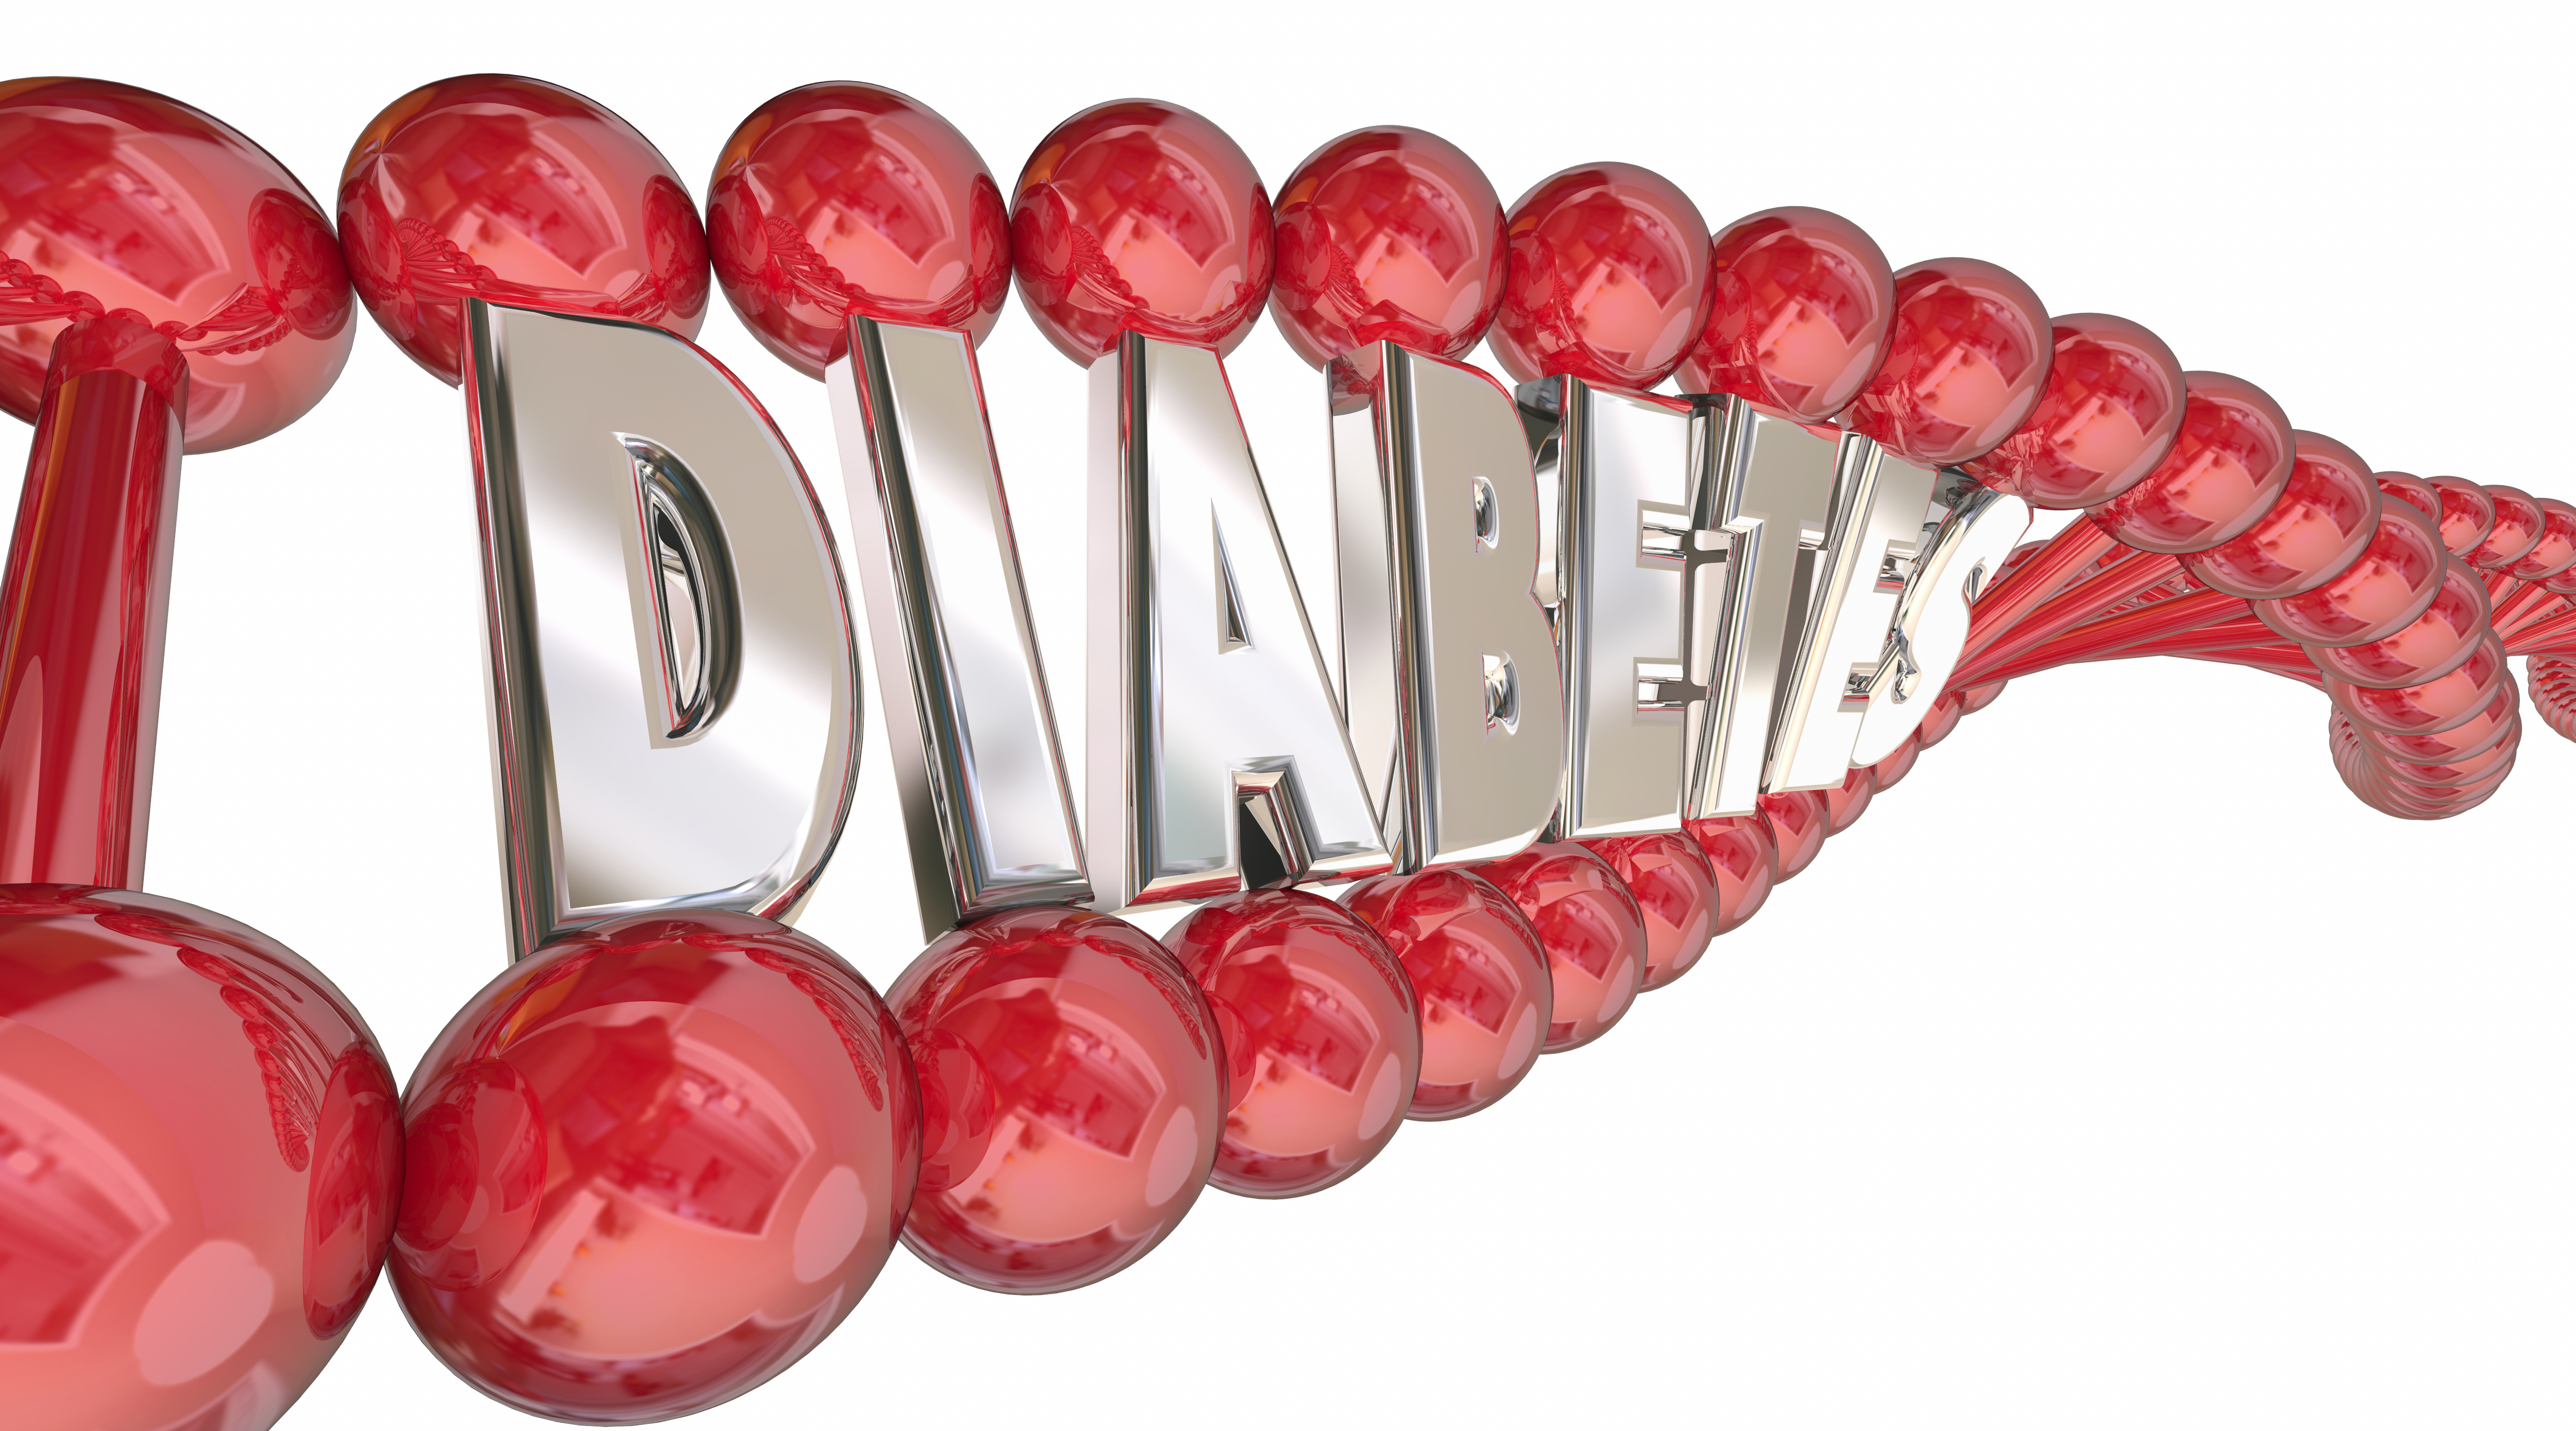 Back to Basics for the Clinician Series. Diagnosing and Managing Diabetes: A 21st Century Approach